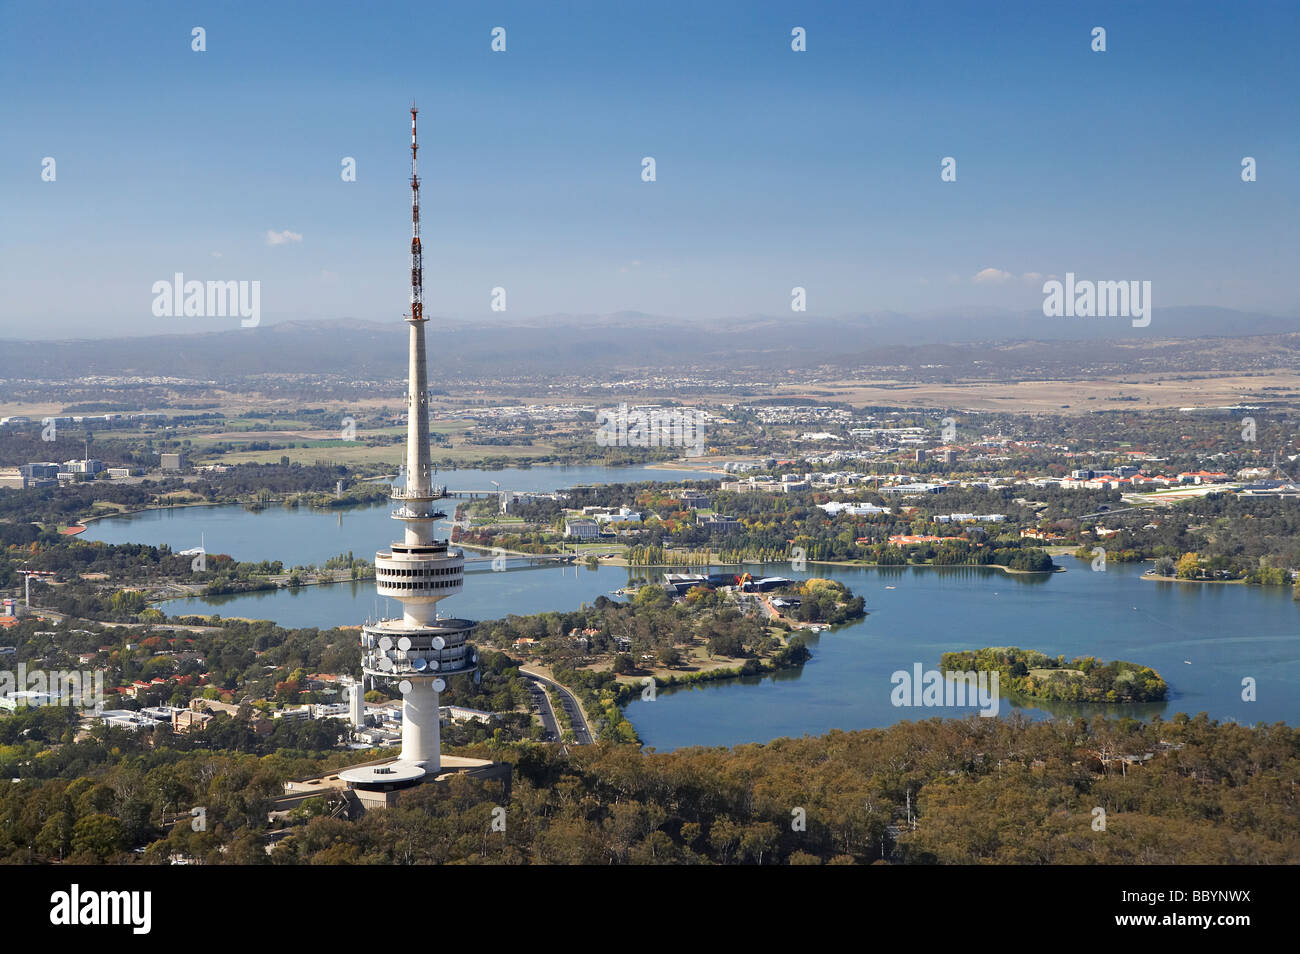 Telstra Tower Black Mountain and Lake Burley Griffin Canberra ACT Australia aerial Stock Photo